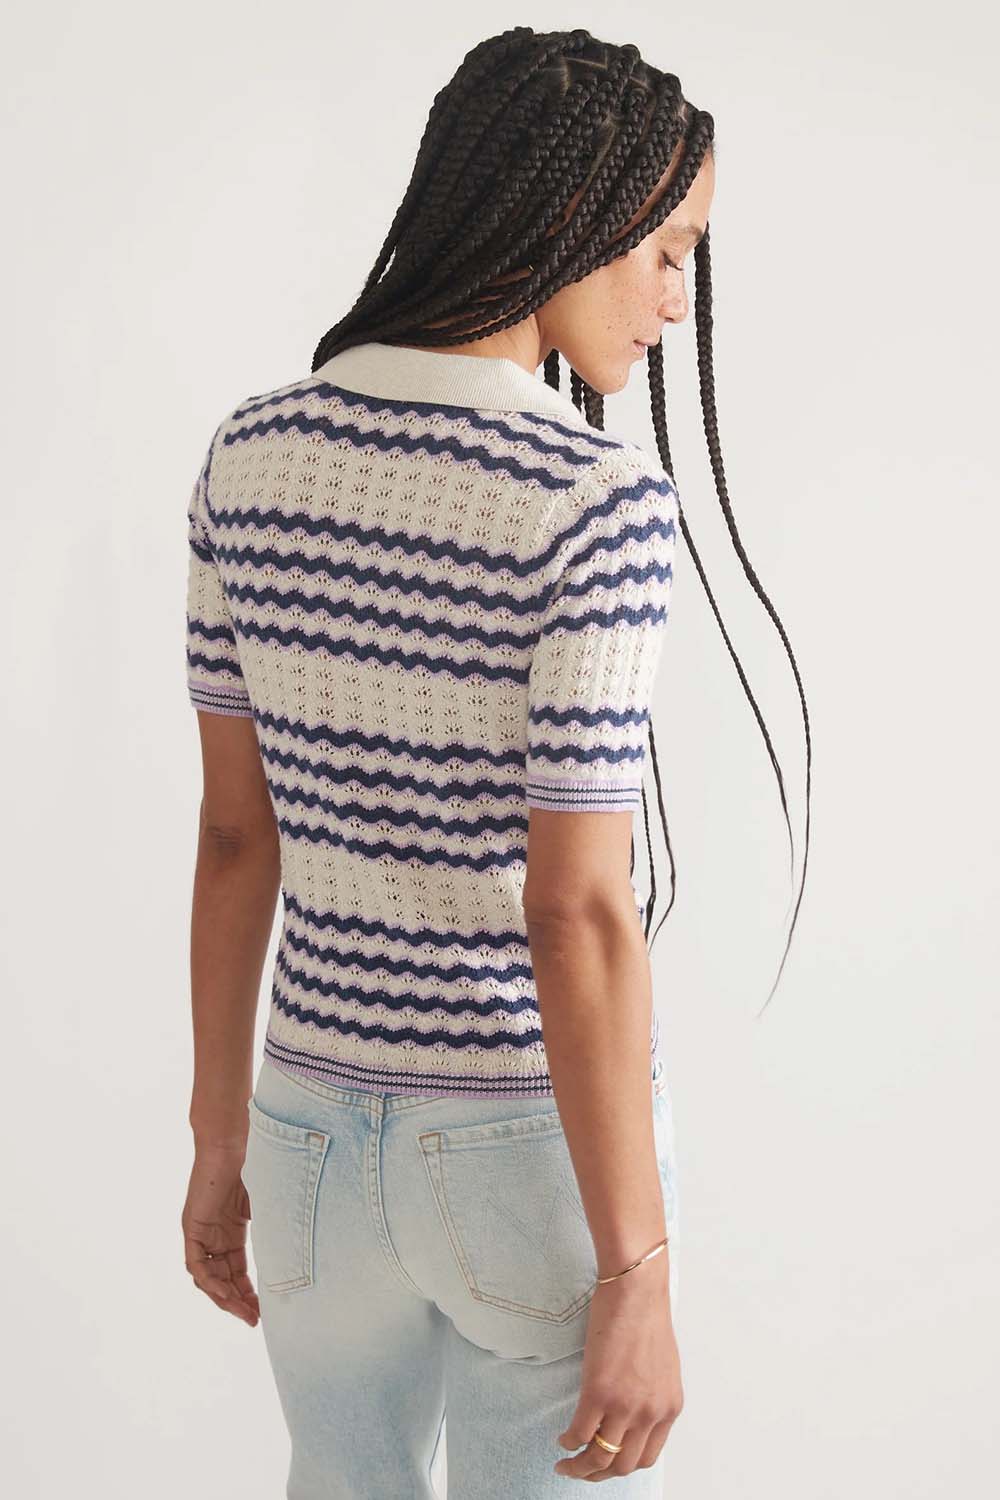 Marine Layer - Spencer Polo Sweater - Cool Wave - Back